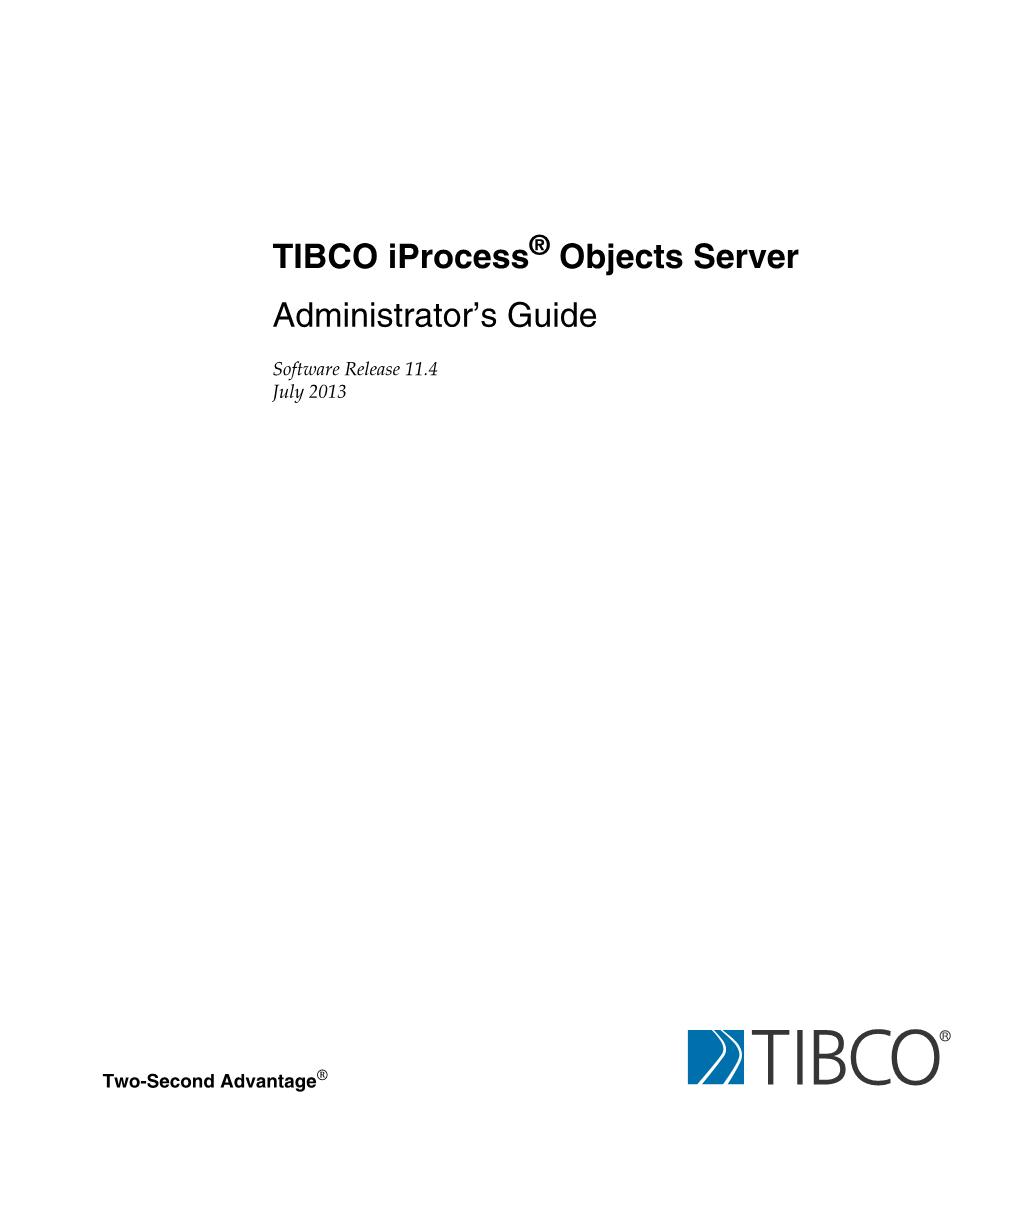 TIBCO Iprocess Objects Server Administrator's Guide